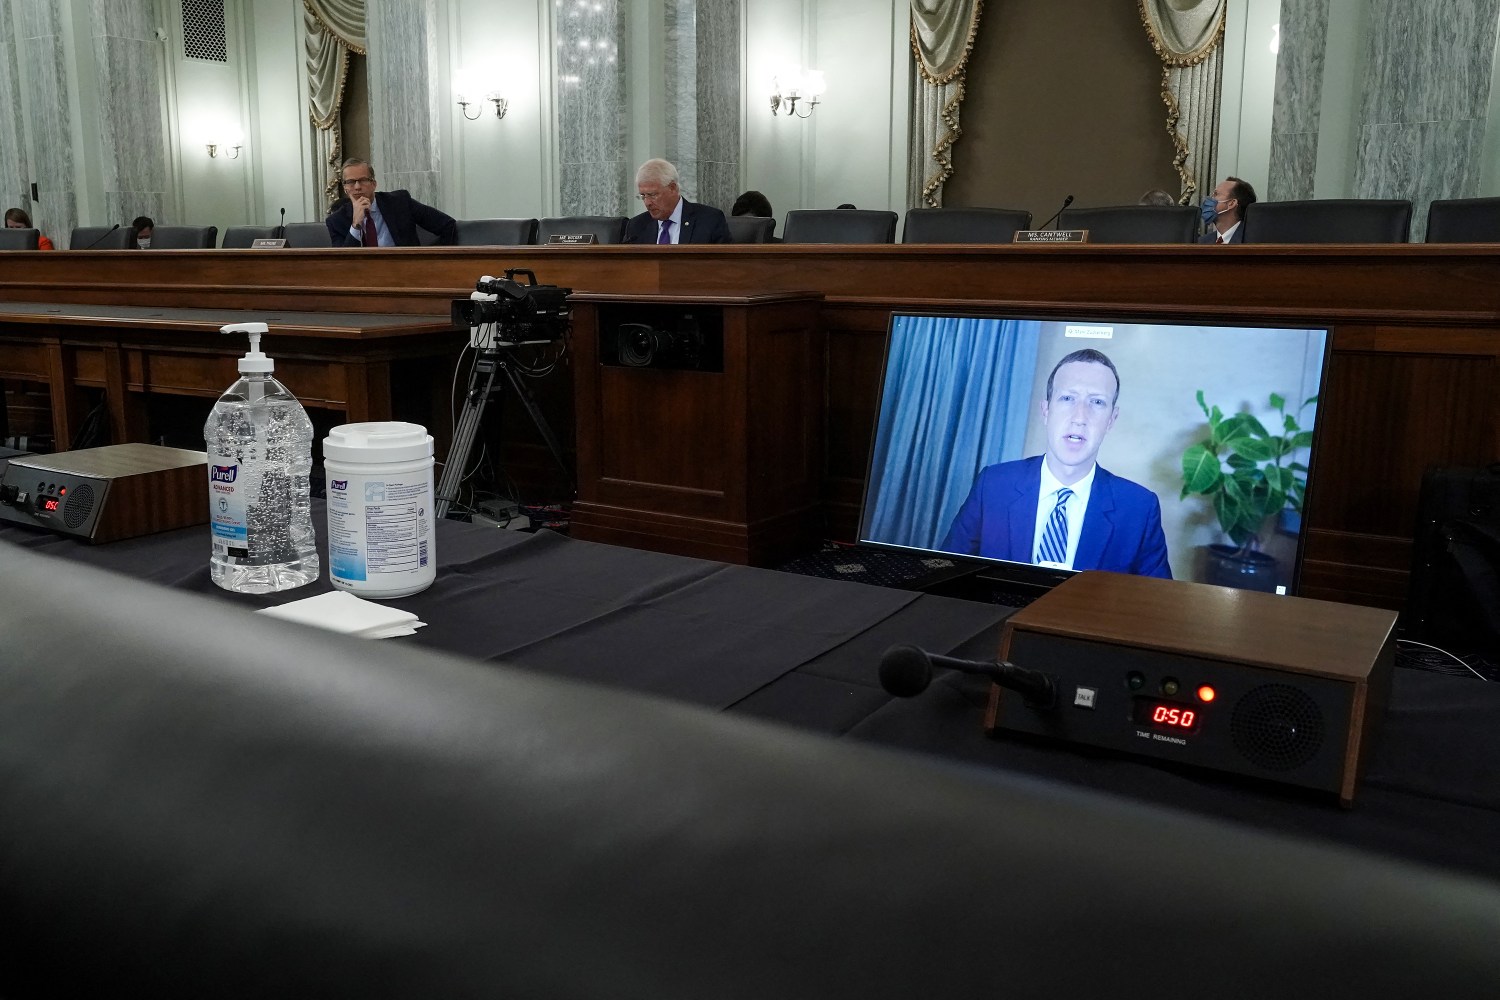 Facebook CEO Mark Zuckerberg testifies remotely during a Senate Commerce, Science, and Transportation Committee hearing to discuss reforming Section 230 of the Communications Decency Act with big tech companies on Wednesday, October 28, 2020. Photo by Greg Nash/Pool/ABACAPRESS.COM